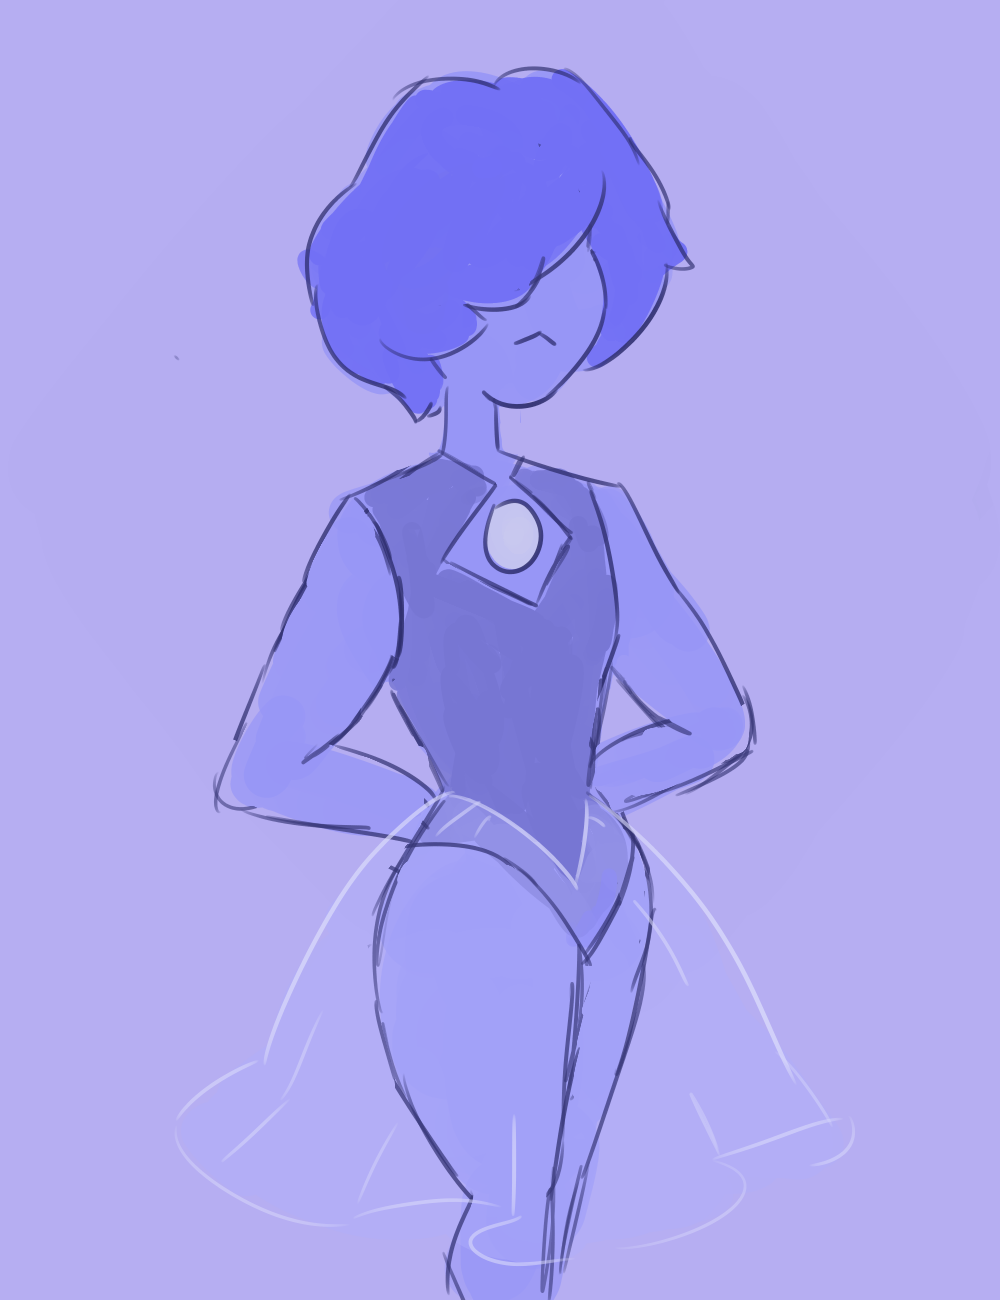 Quick blue pearl doodle NO PEARL SHALL HAVE A NOSE